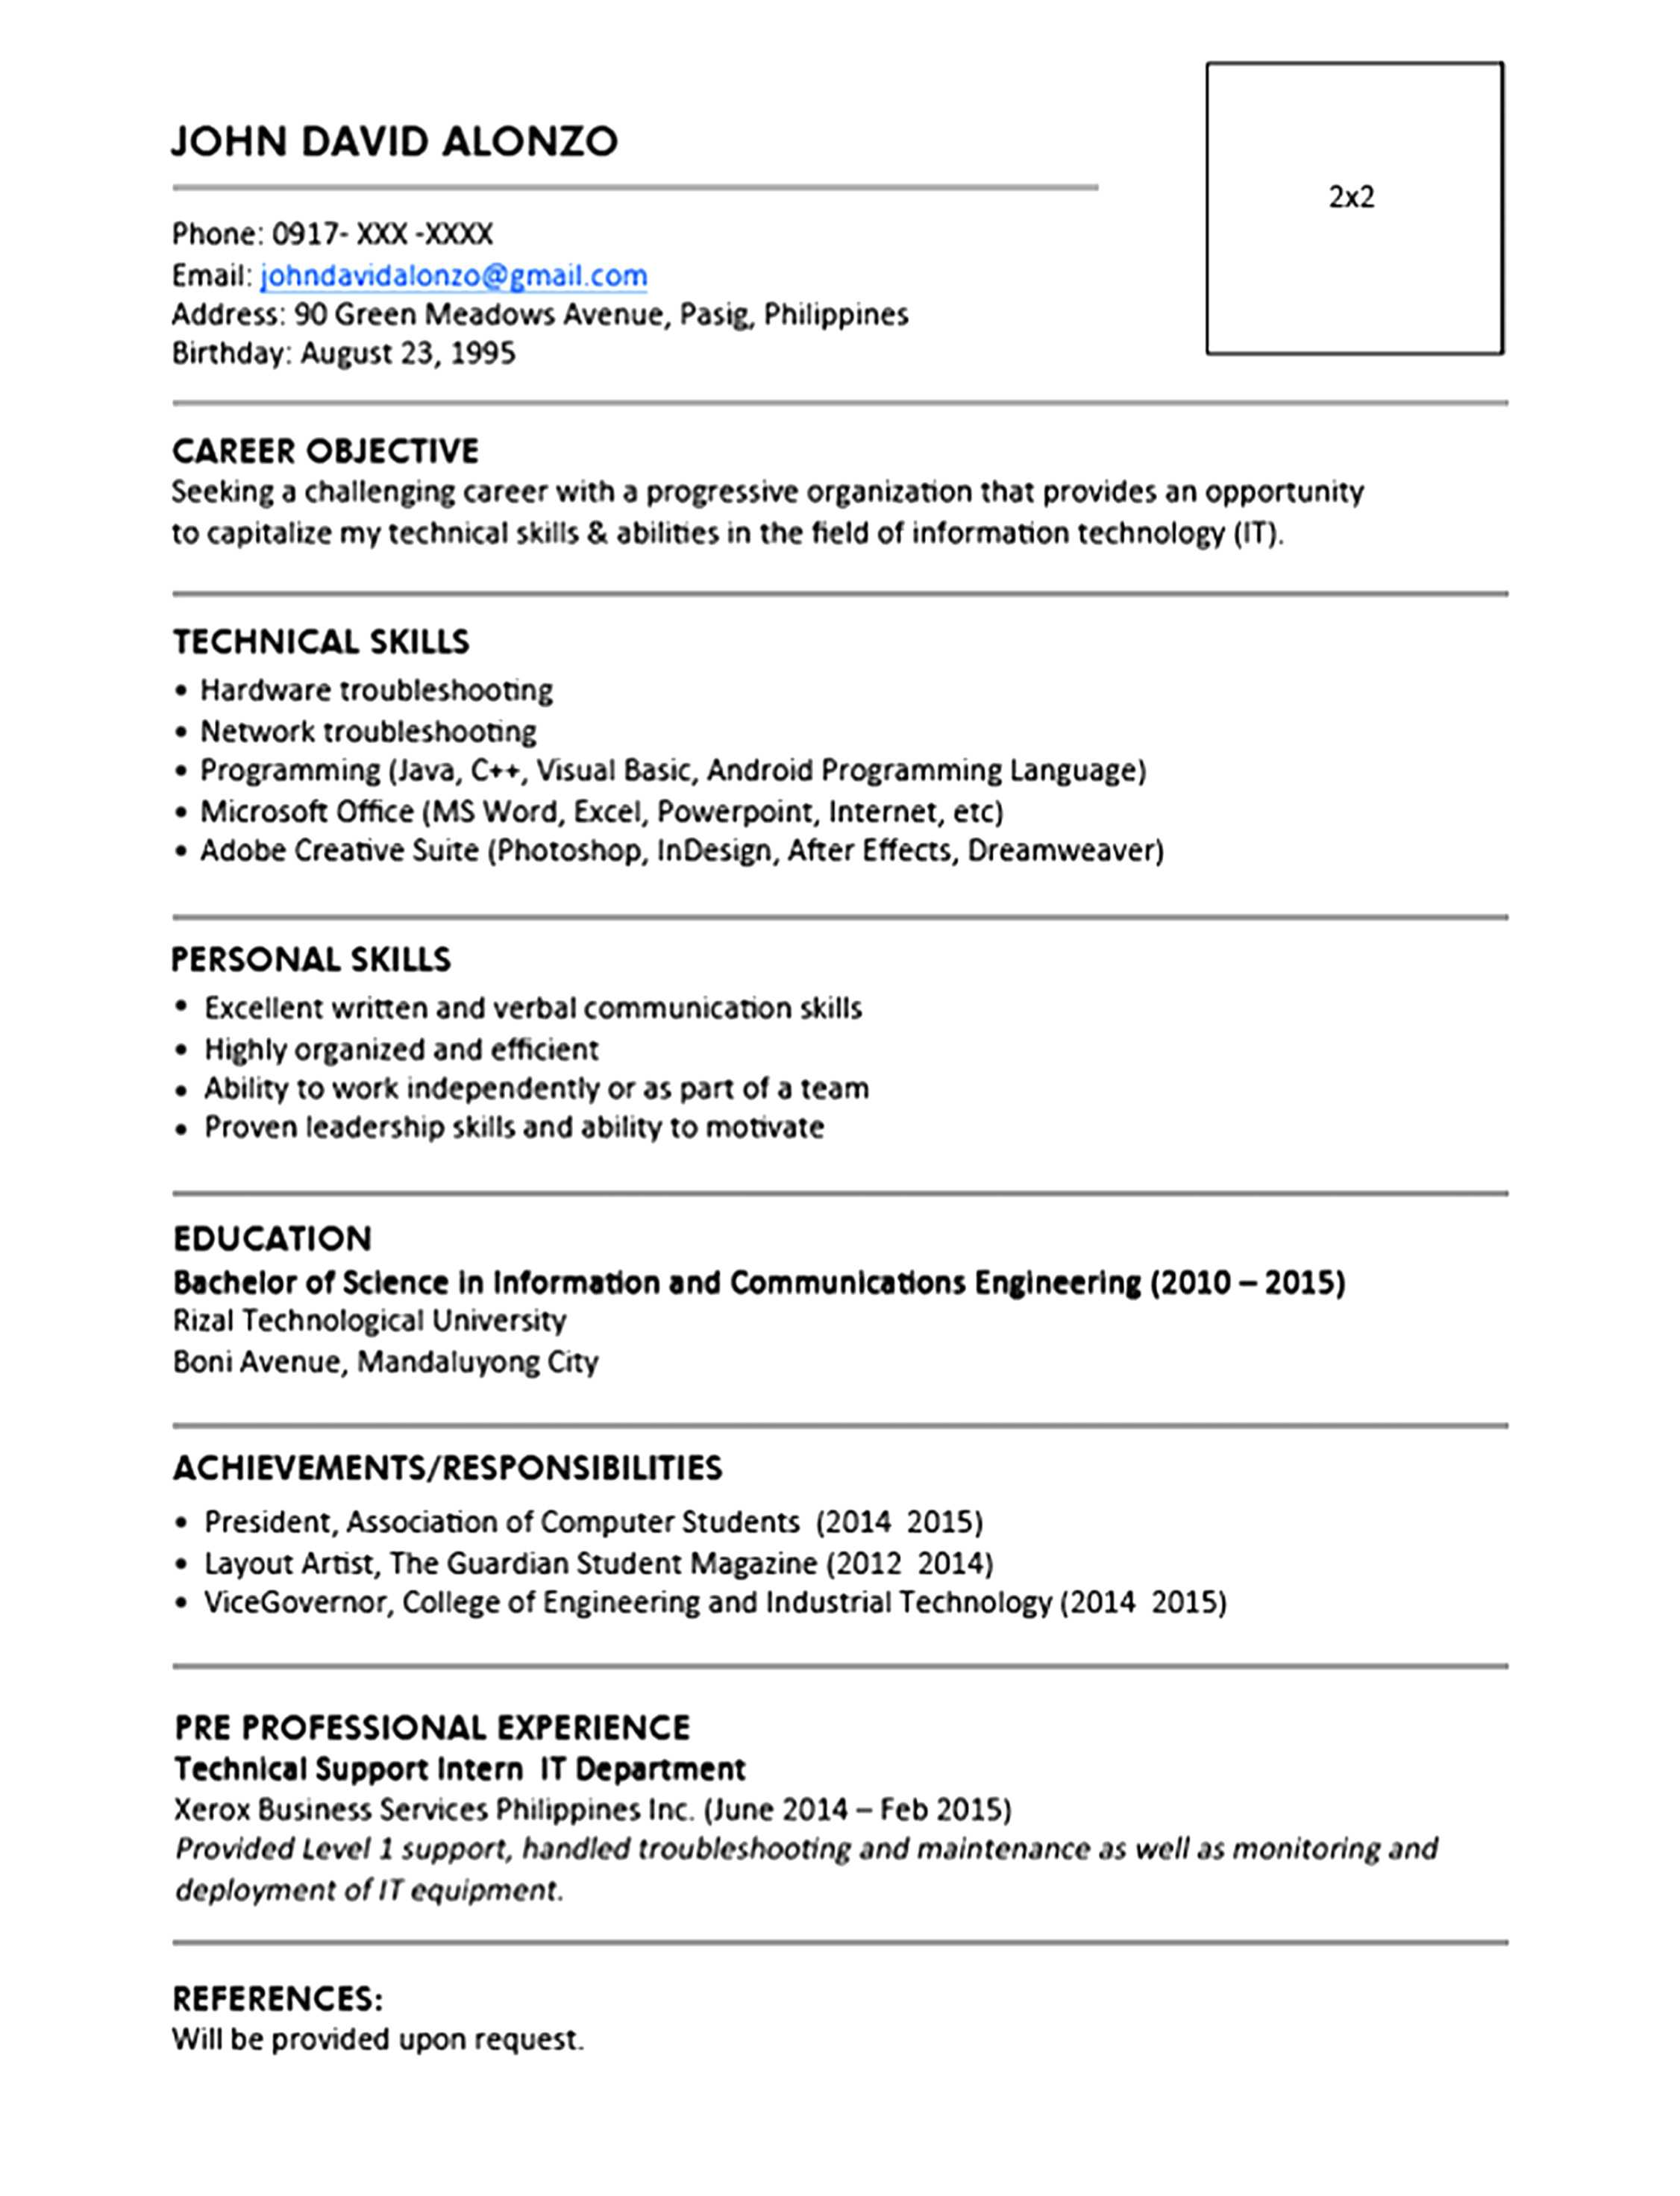 9 Cv Templates Word 2010 Uaopt Templatesz234 (Resume Intended For Resume Templates Word 2010